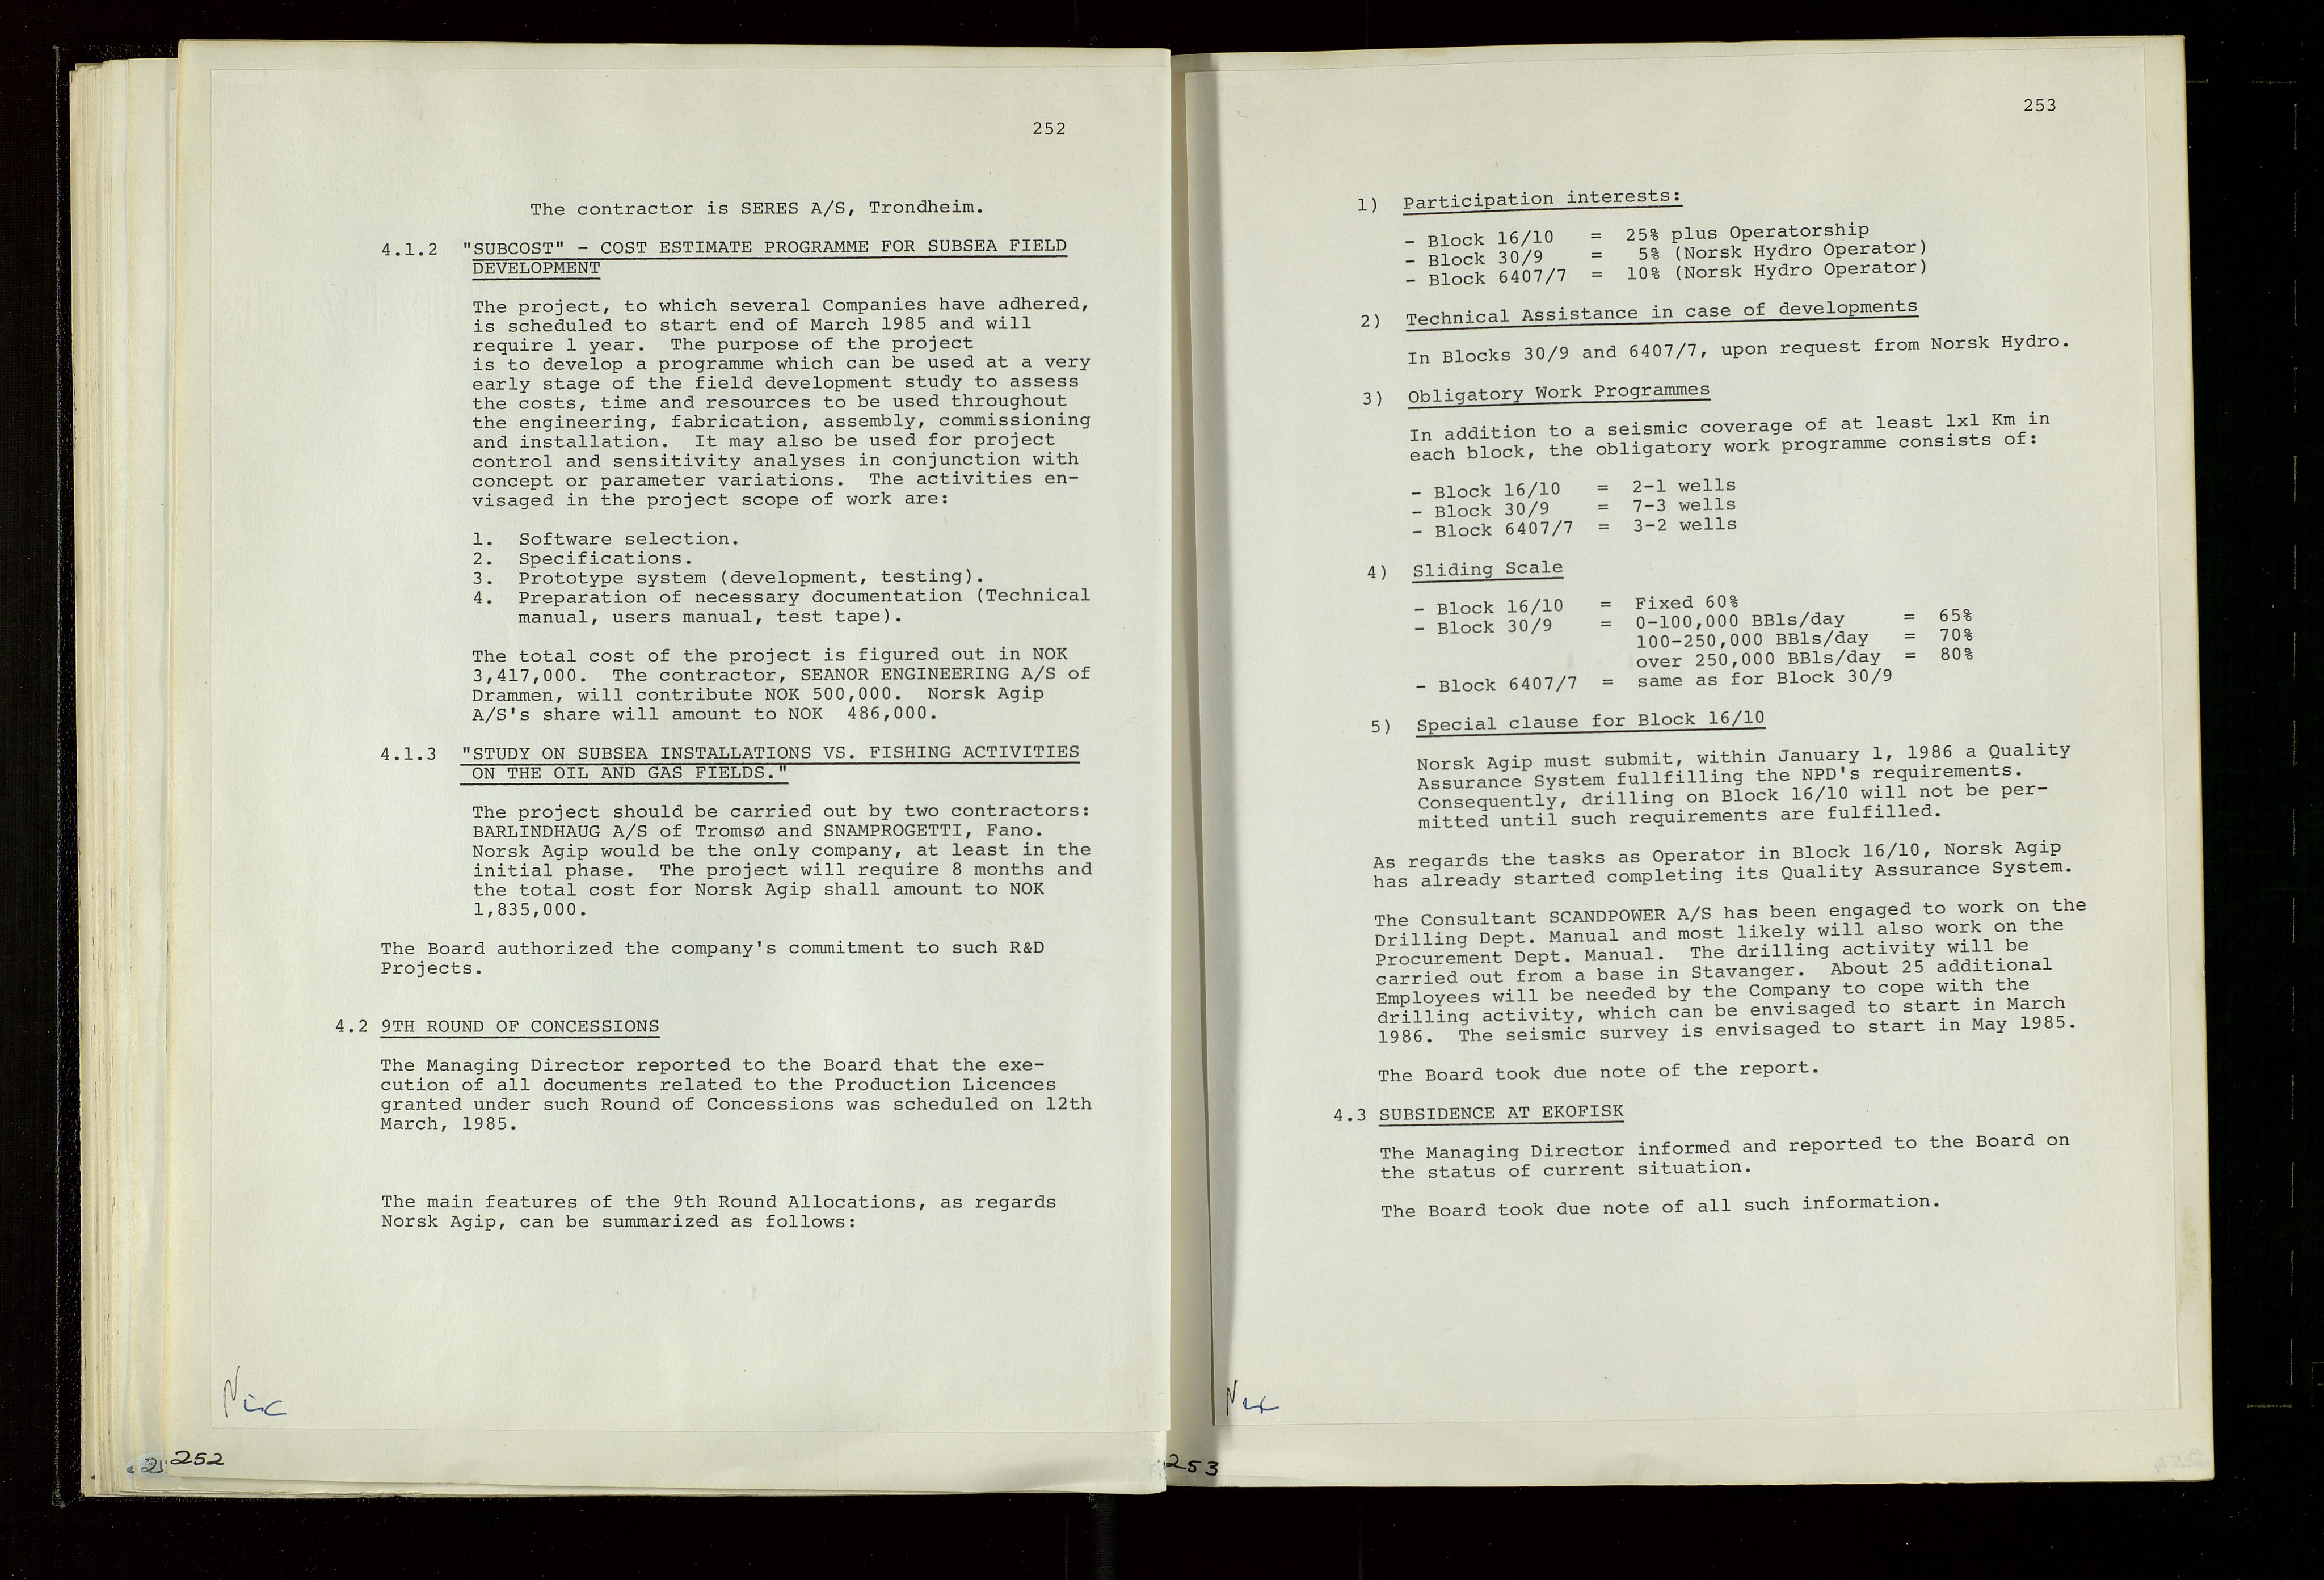 Pa 1583 - Norsk Agip AS, SAST/A-102138/A/Aa/L0003: Board of Directors meeting minutes, 1979-1983, s. 252-253